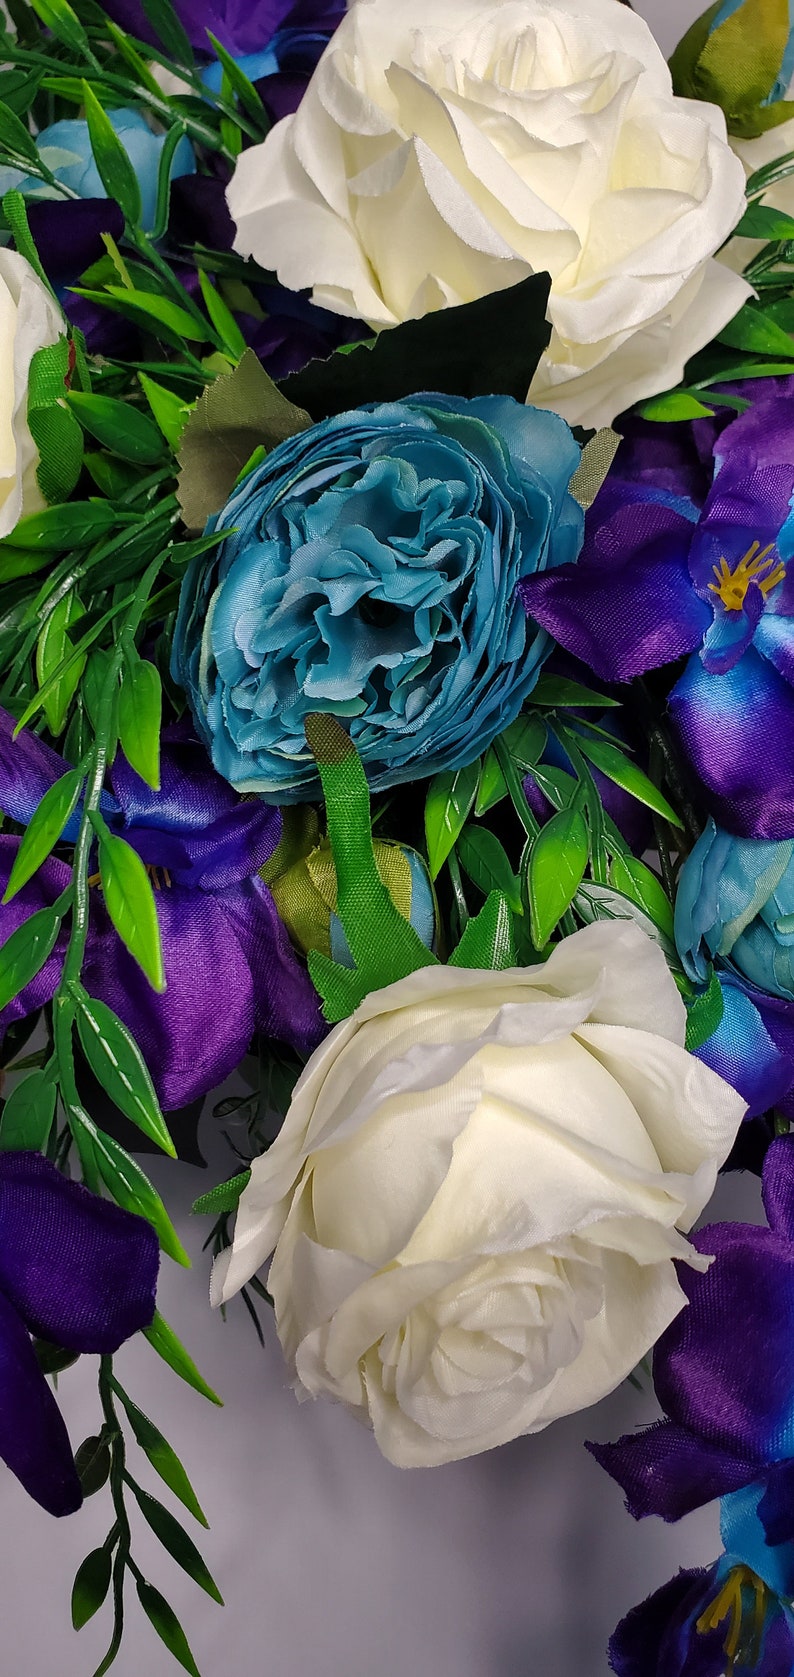 Puple and Teal Bridal Bouquet, Large Cascade Bridal Bouquet, Purple Orchids, White Roses, Teal Peonies, Greenery, Artificial Silk Flowers image 4